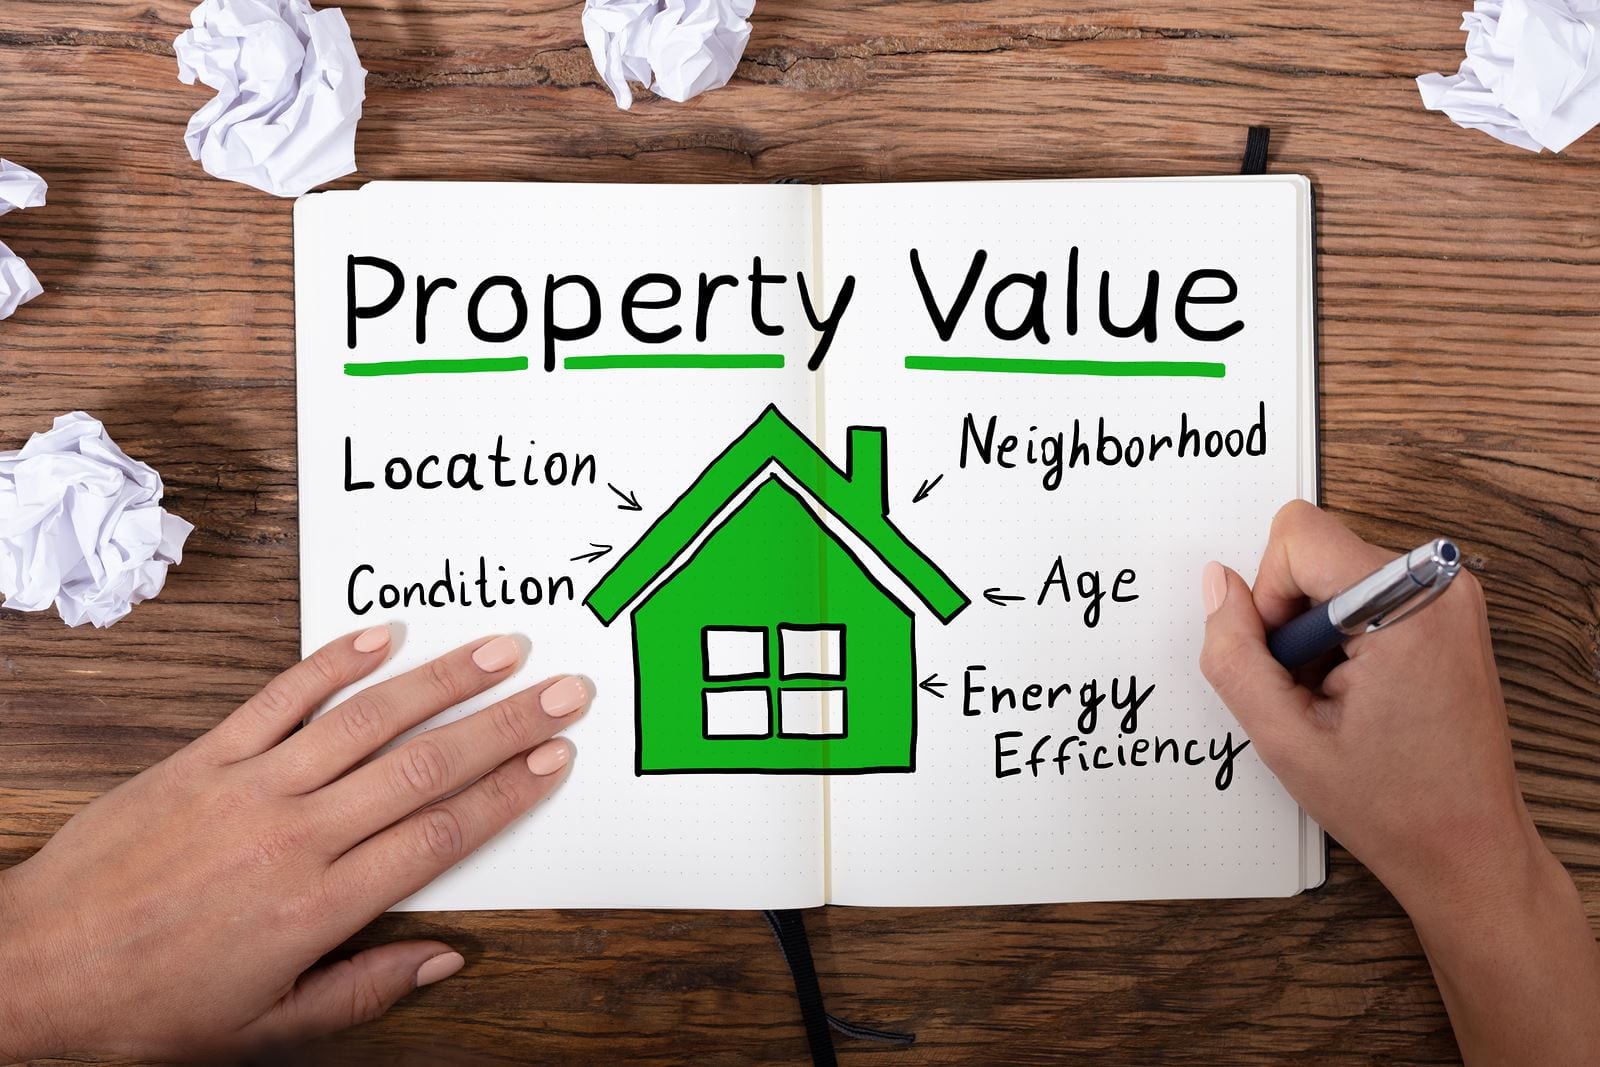 What Affects Home Value The Most